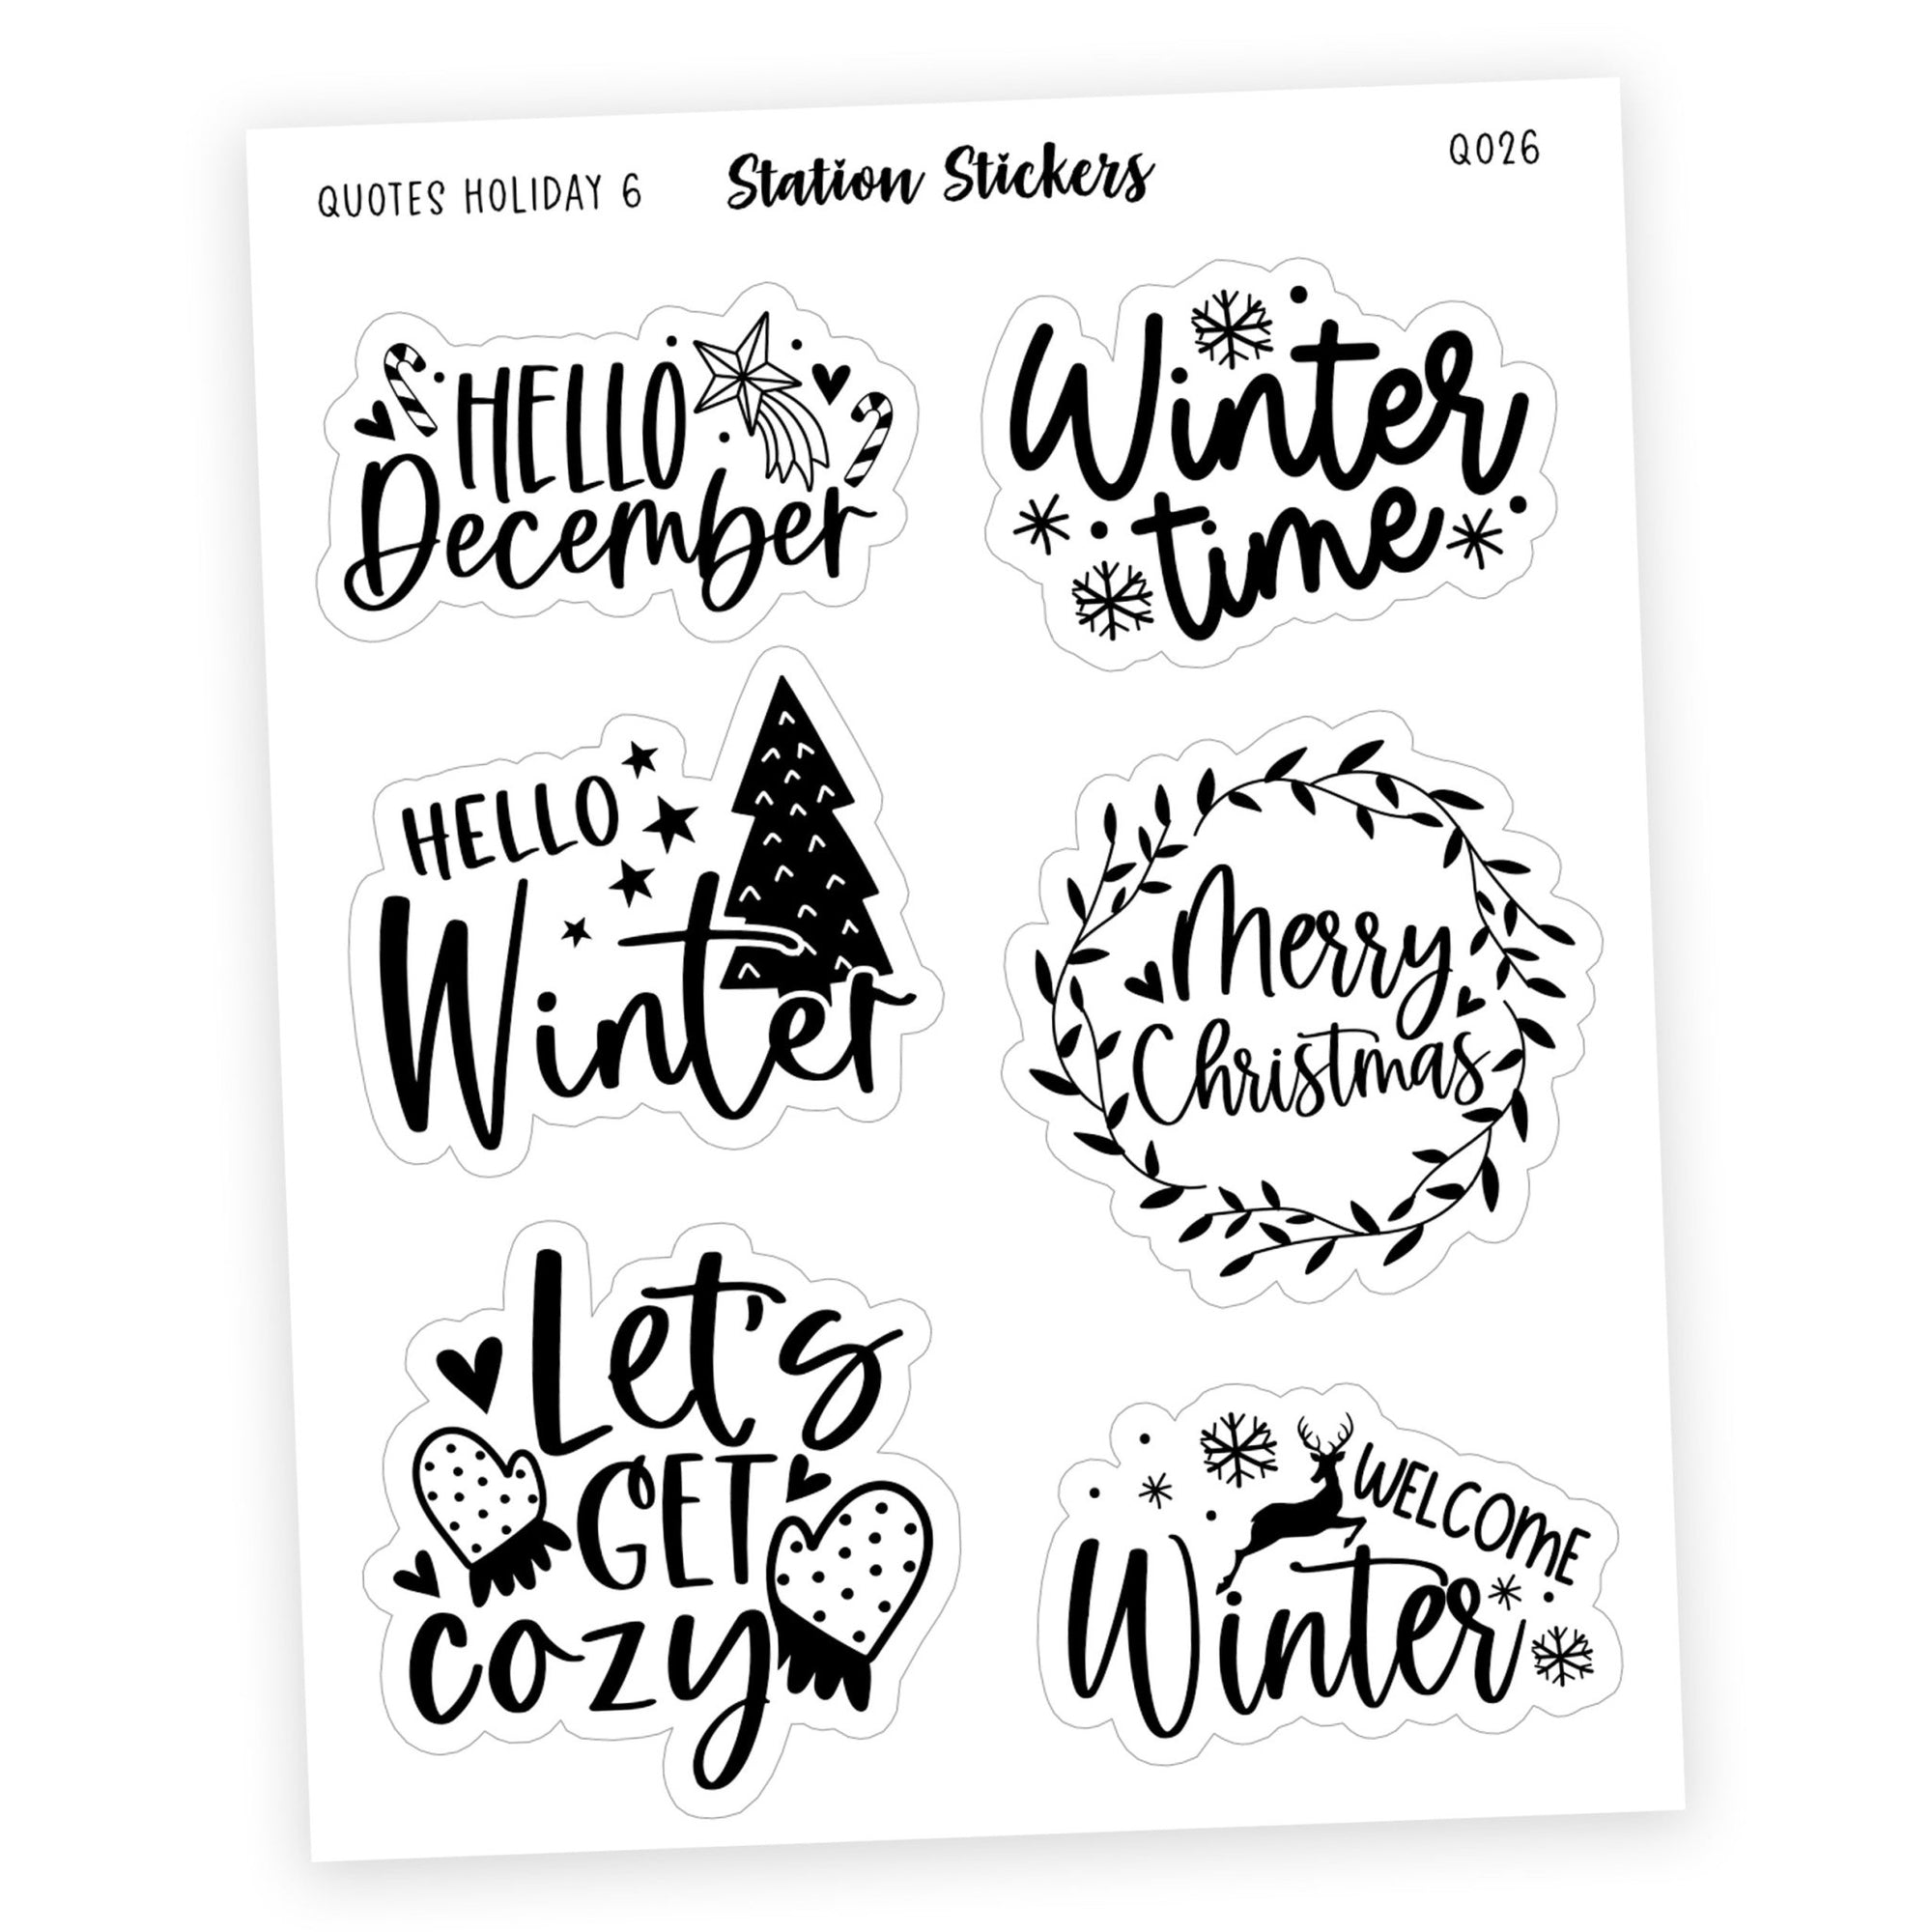 QUOTES • HOLIDAY 6 - Station Stickers